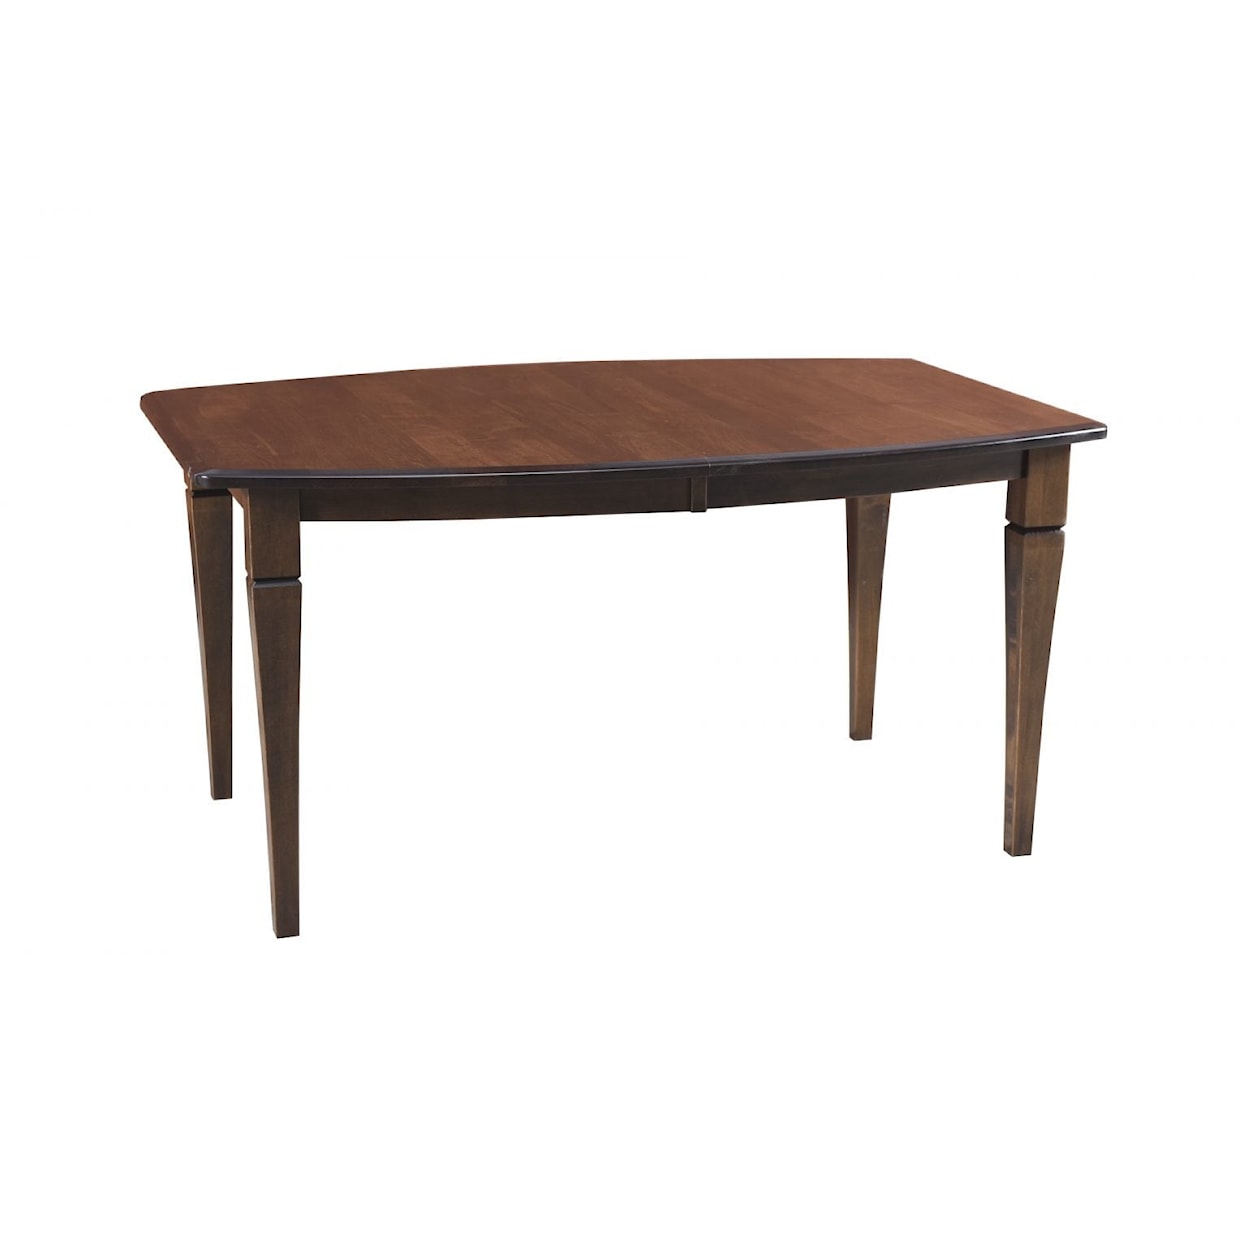 Archbold Furniture Amish Essentials Casual Dining Boat Shaped Table